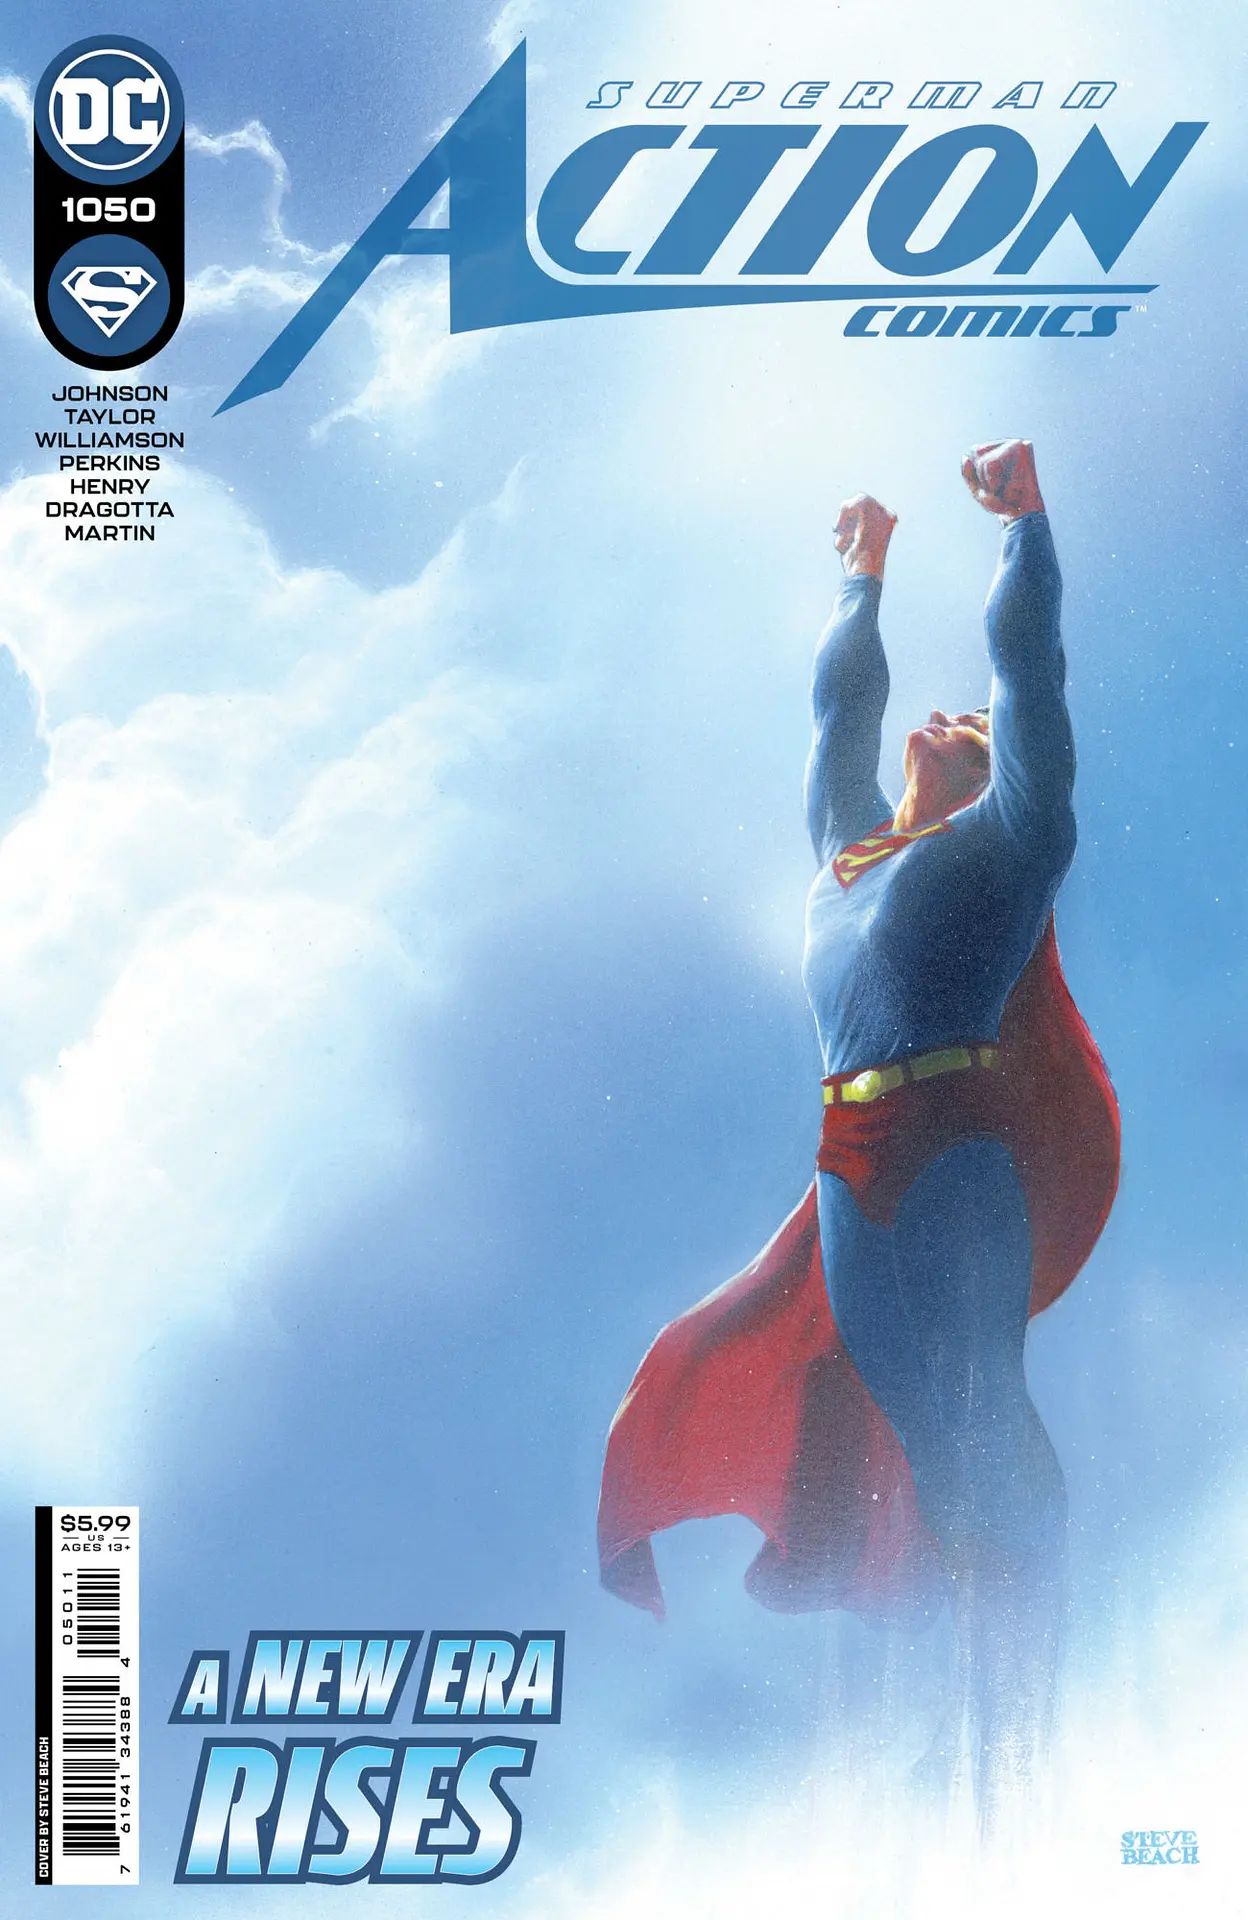 Action Comics #1050 Cover